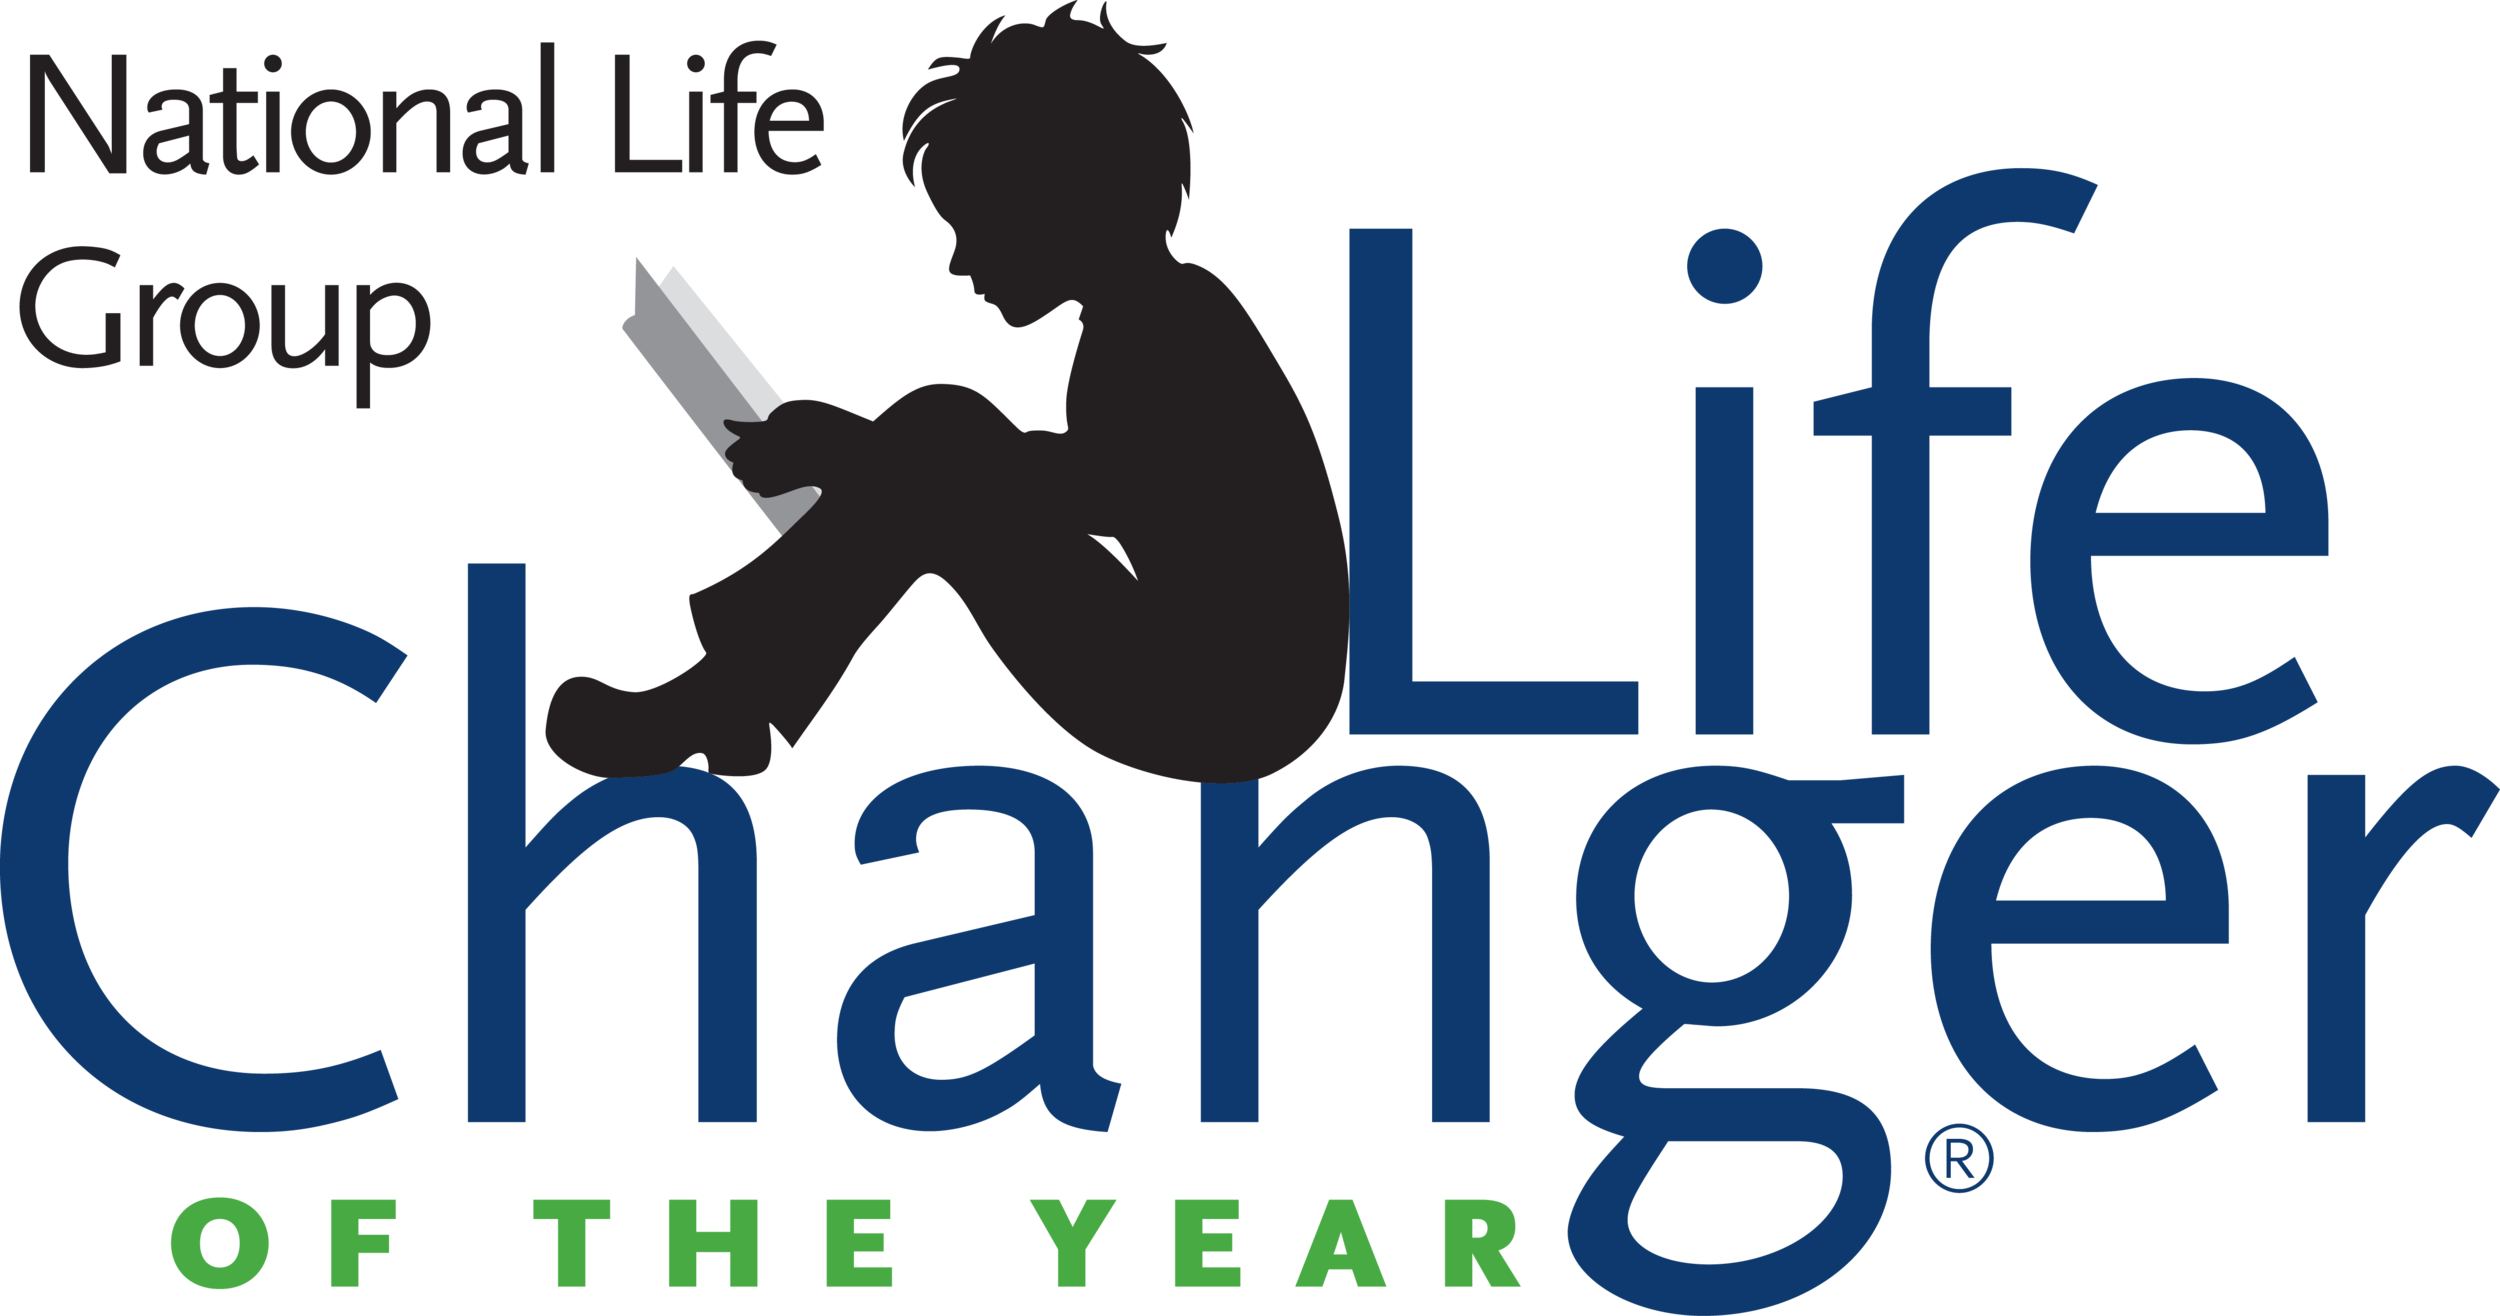 National Life Group LifeChanger of the Year